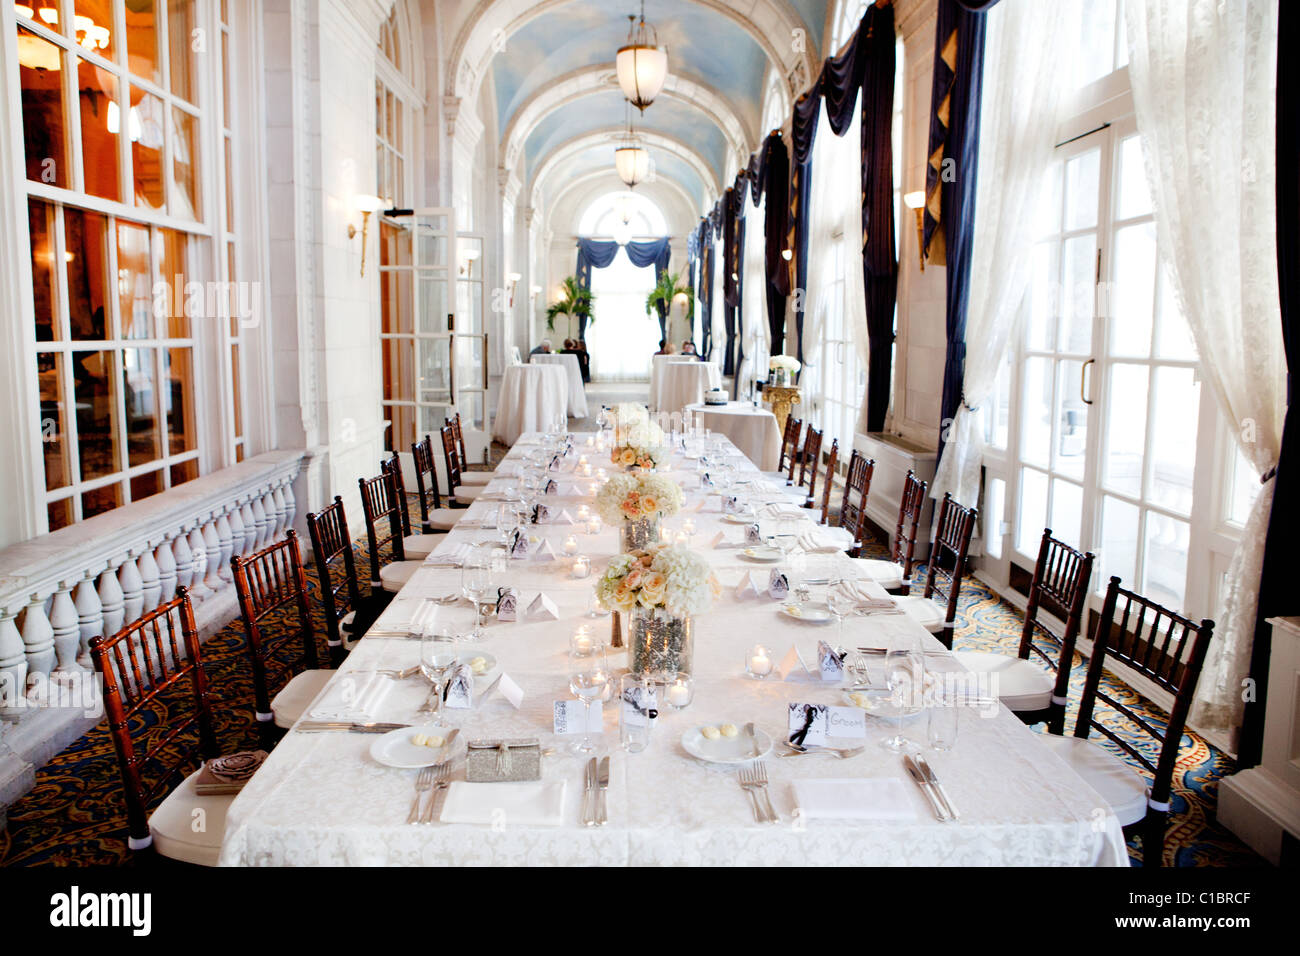 WEDDING THE HERMITAGE HOTEL NASHVILLE TENNESSEE TN INTERIOR ARCHITECTURE OLD CLASSY HOTEL DECORATED DECOR TABLE LINEN Stock Photo